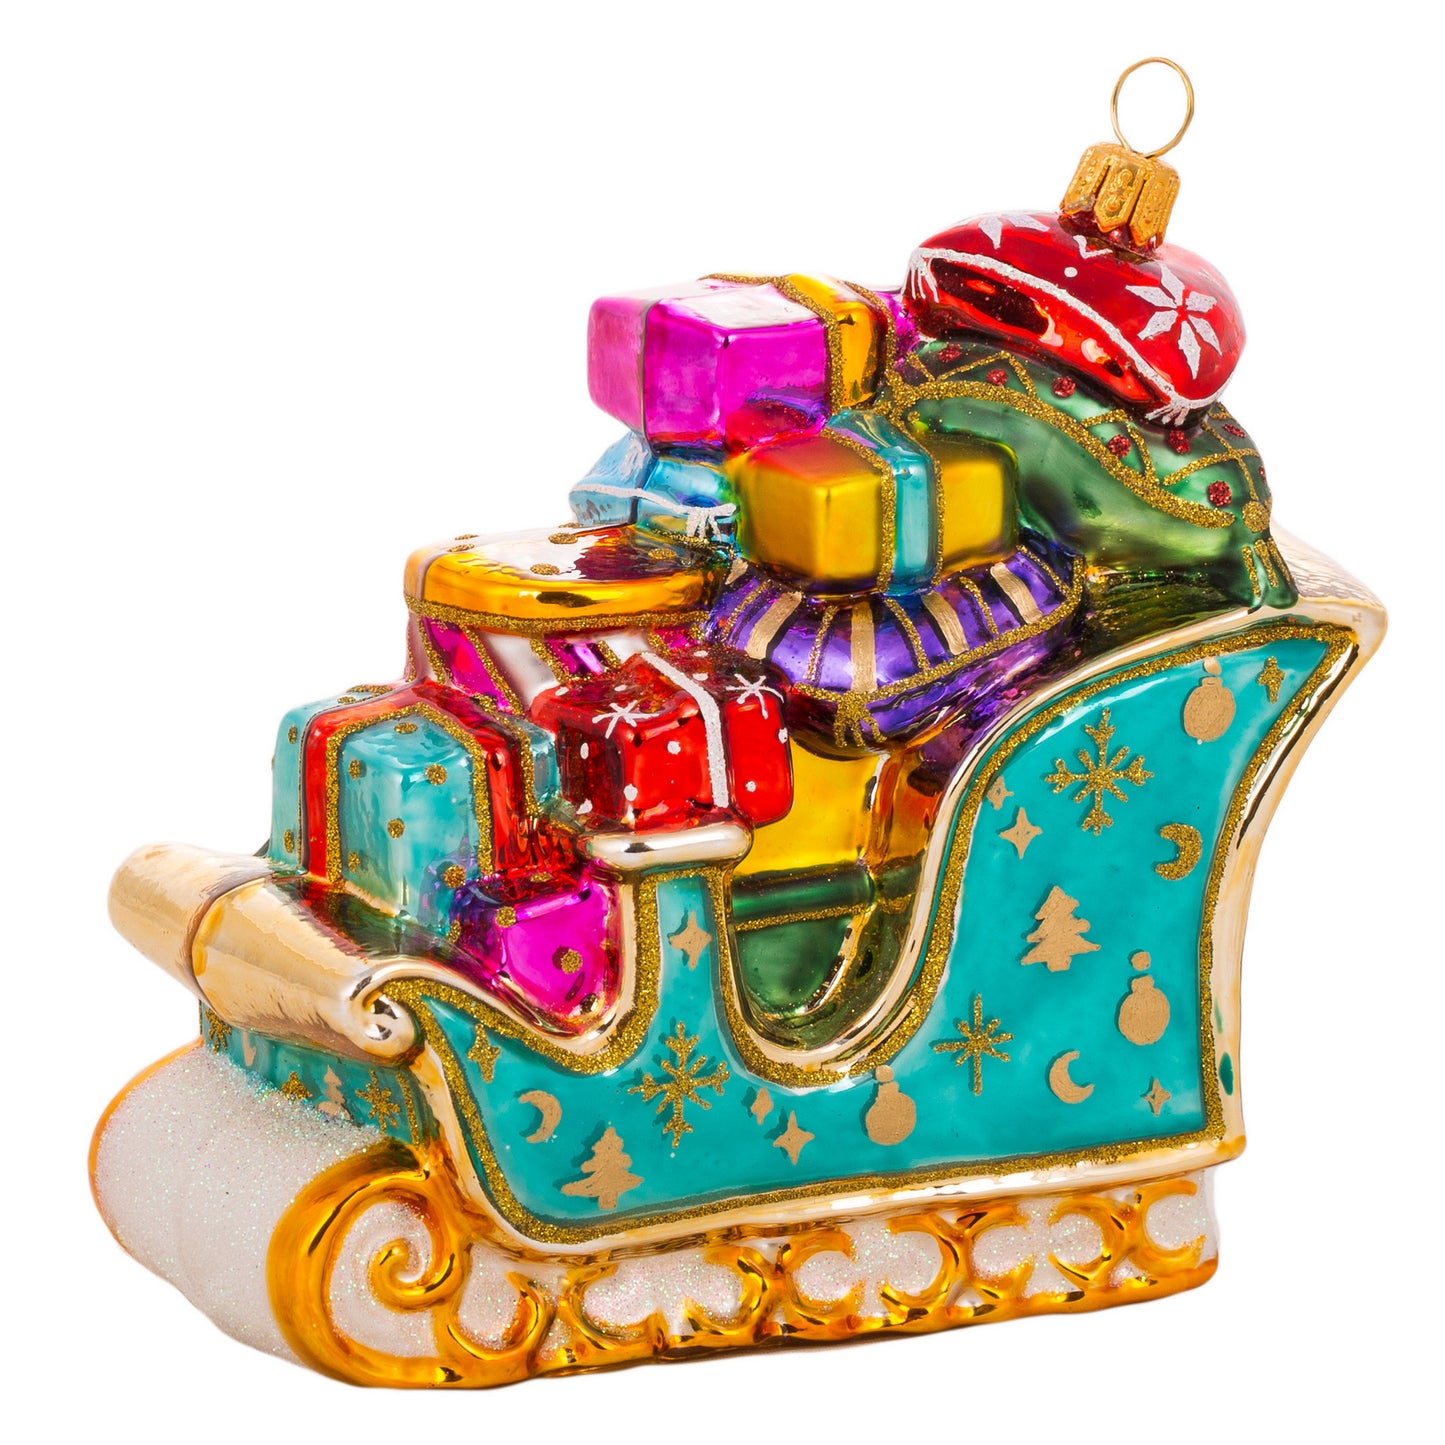 FESTIVE SLEIGH WITH GIFTS